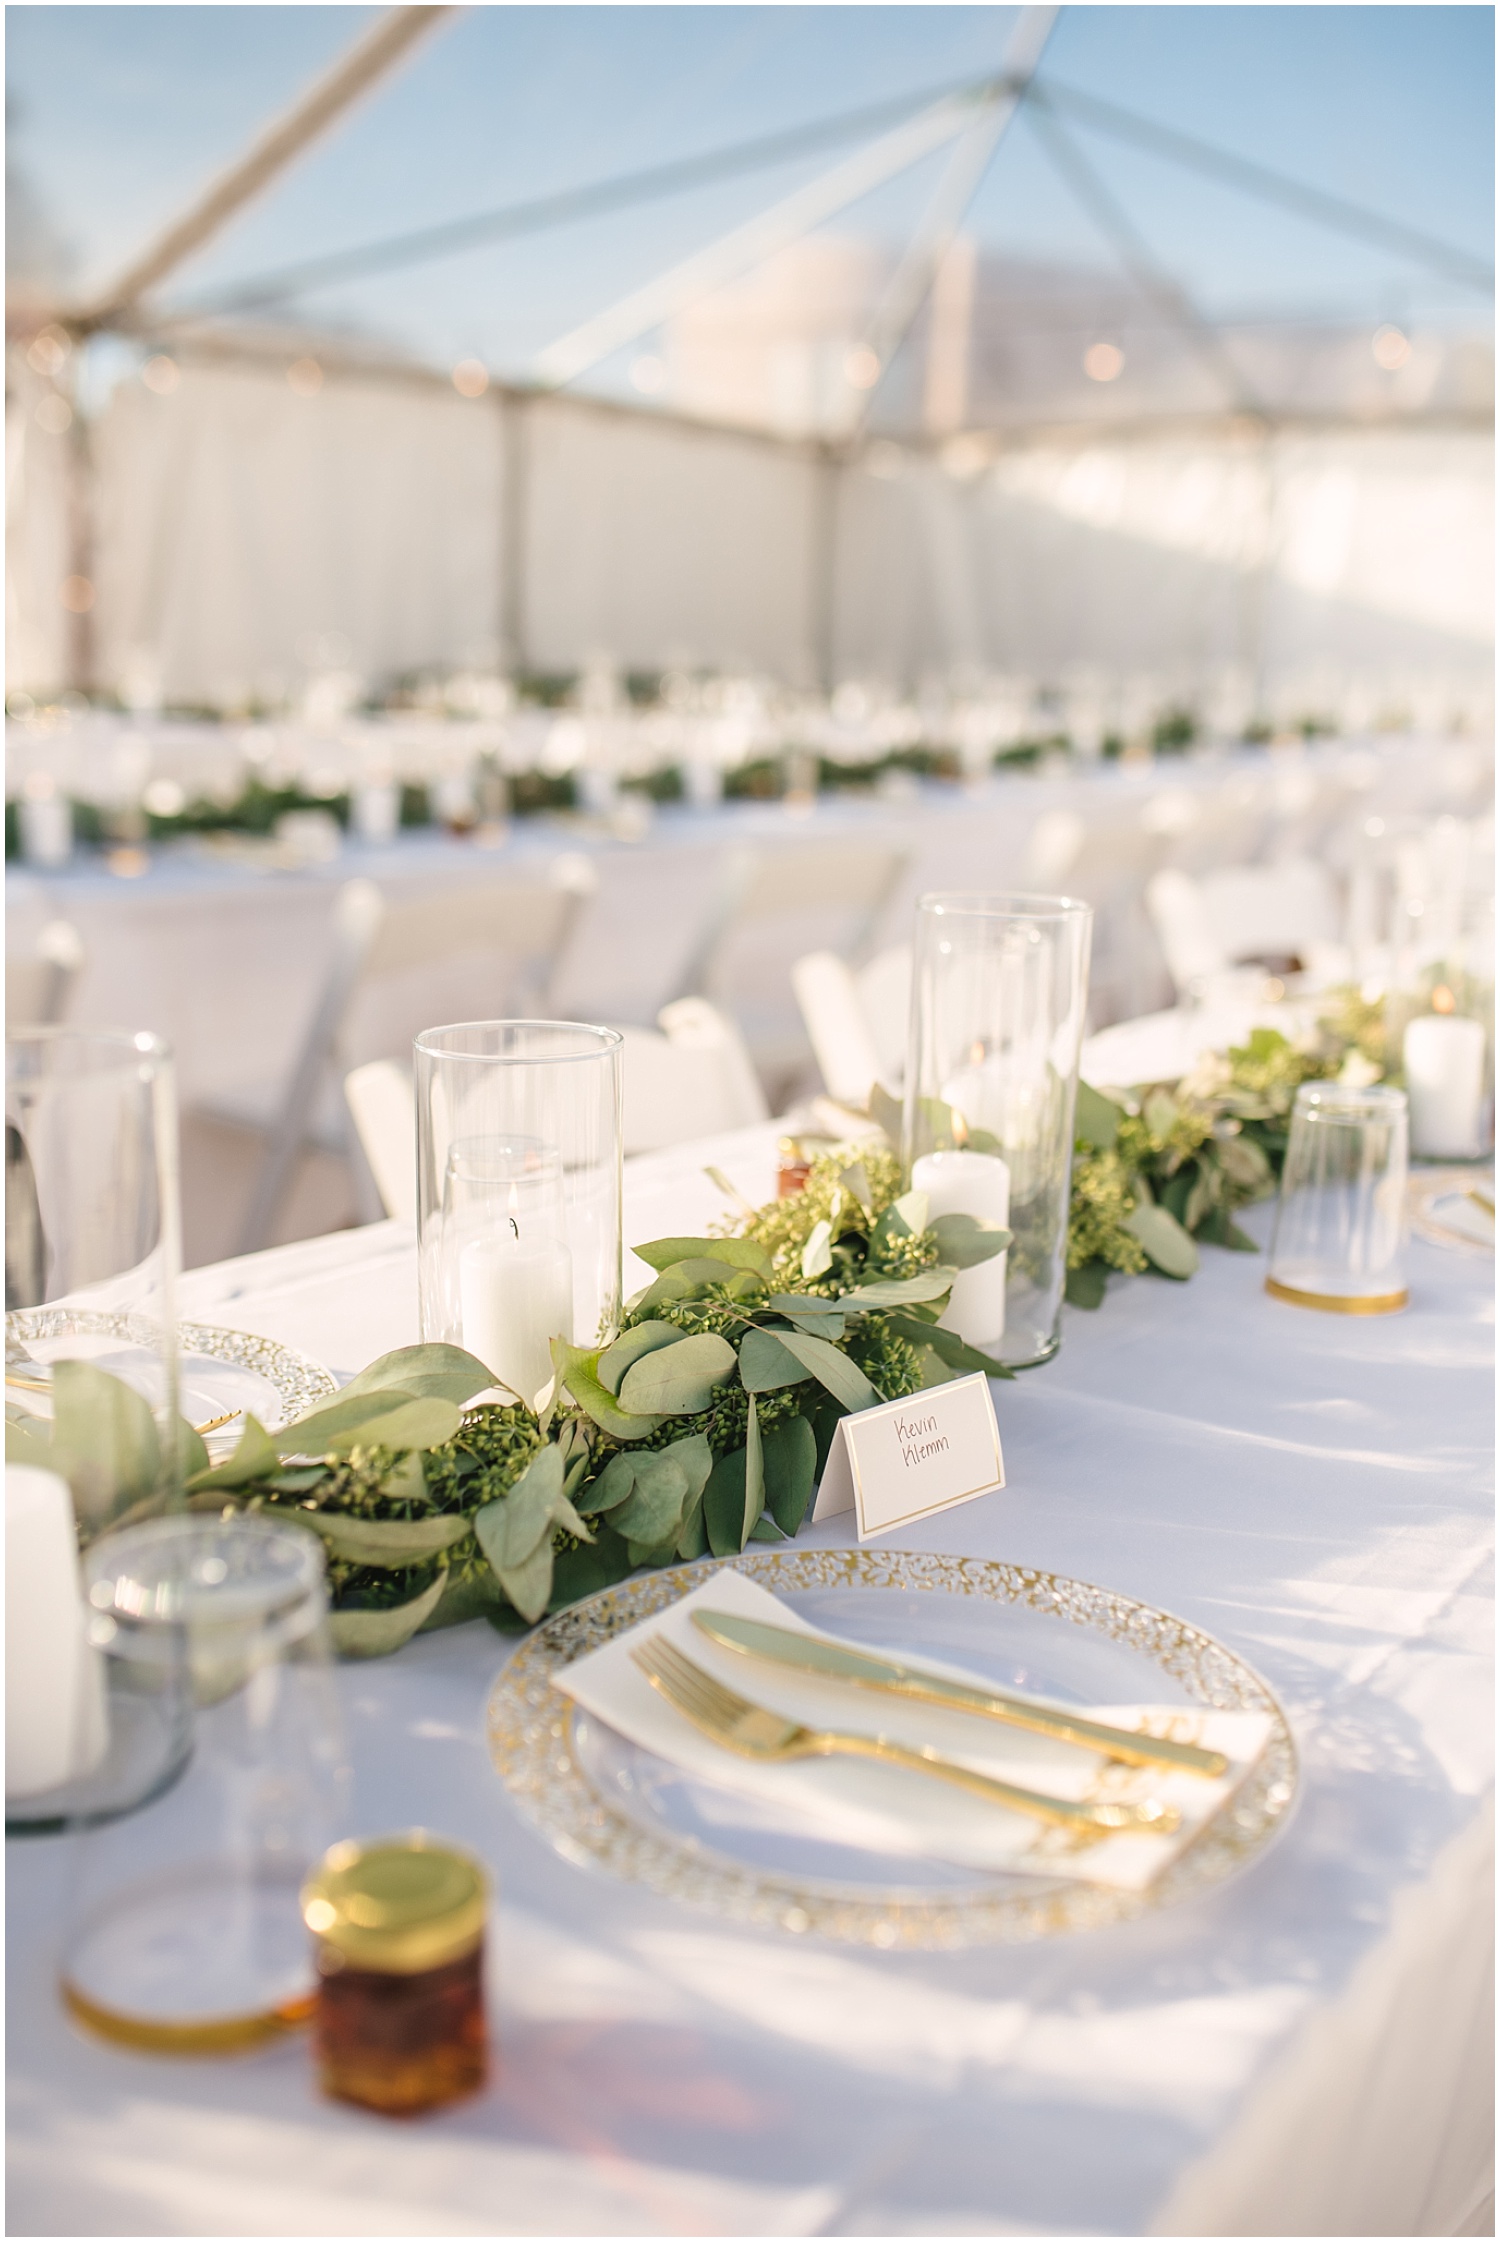 Eucalyptus, white candles, and gold lined dinnerware at backyard wedding in NE Albuquerque Acres